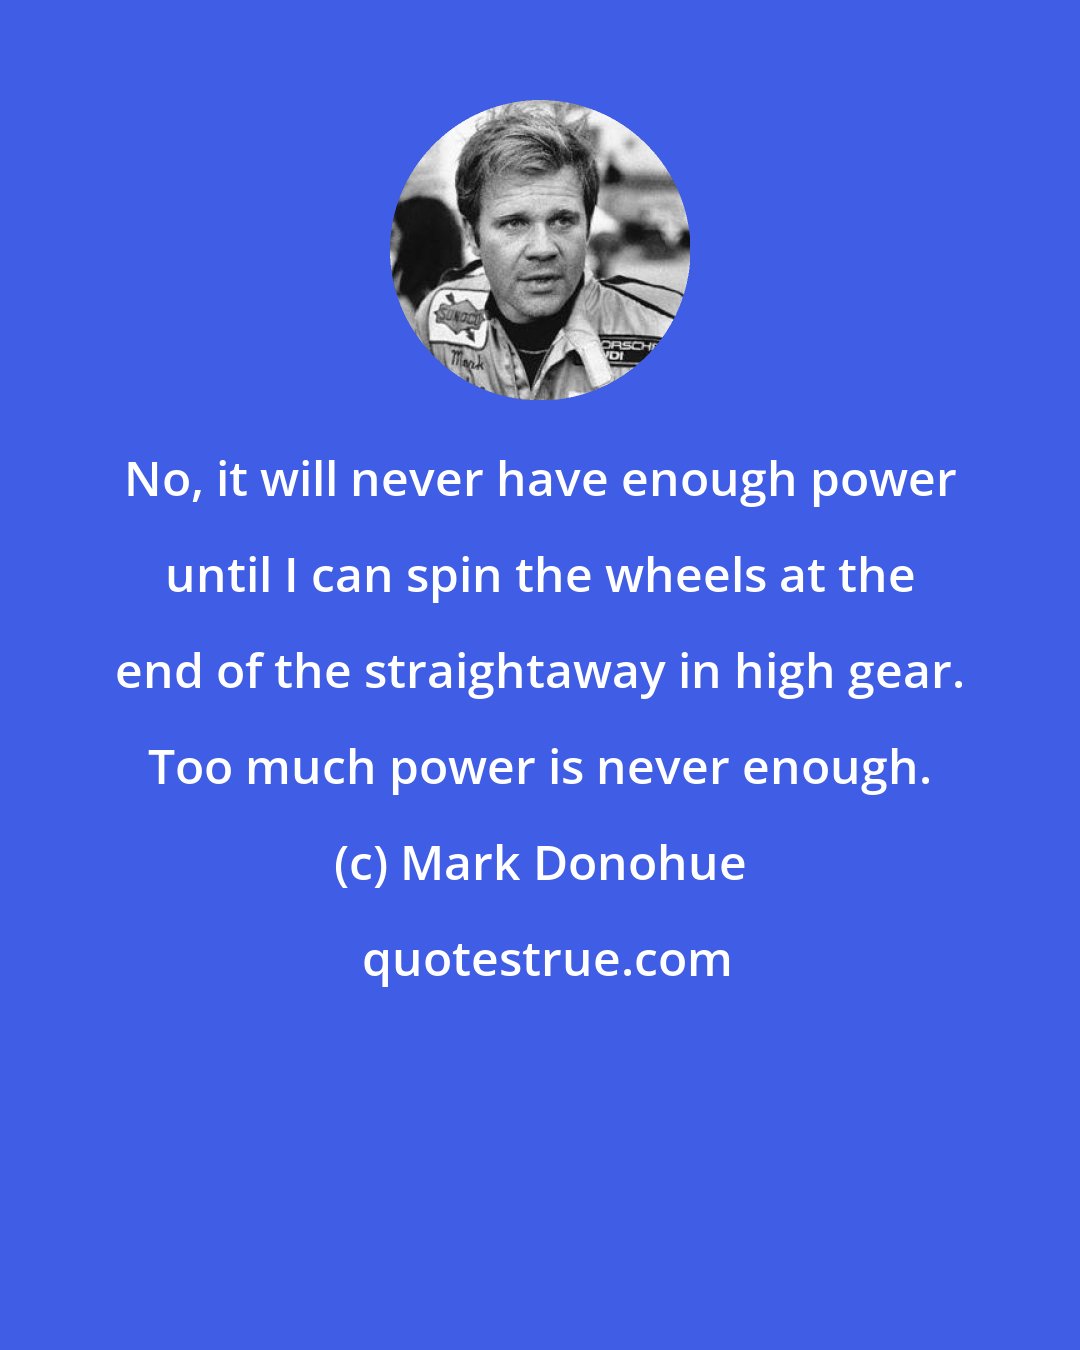 Mark Donohue: No, it will never have enough power until I can spin the wheels at the end of the straightaway in high gear. Too much power is never enough.